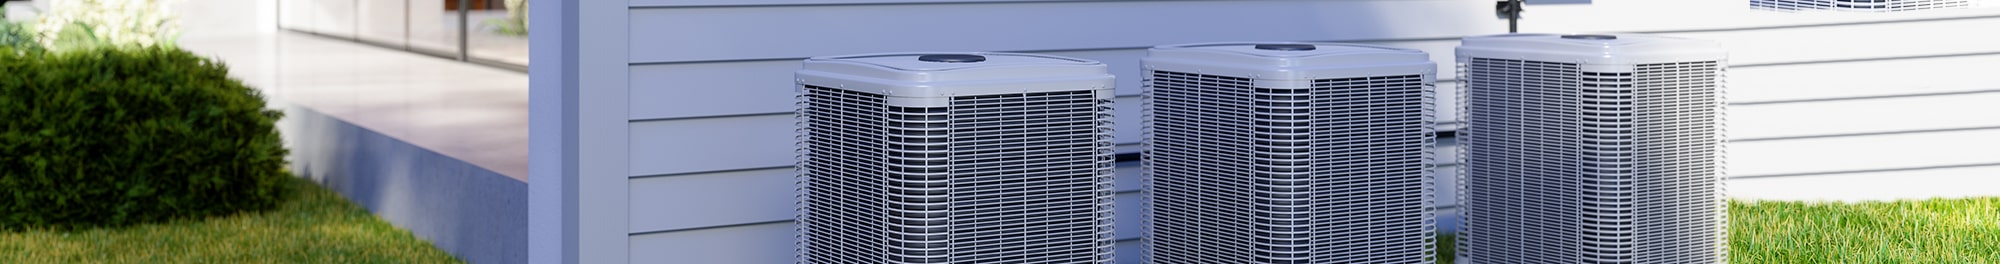 Air conditioning installation & repair in Muskego & New Berlin